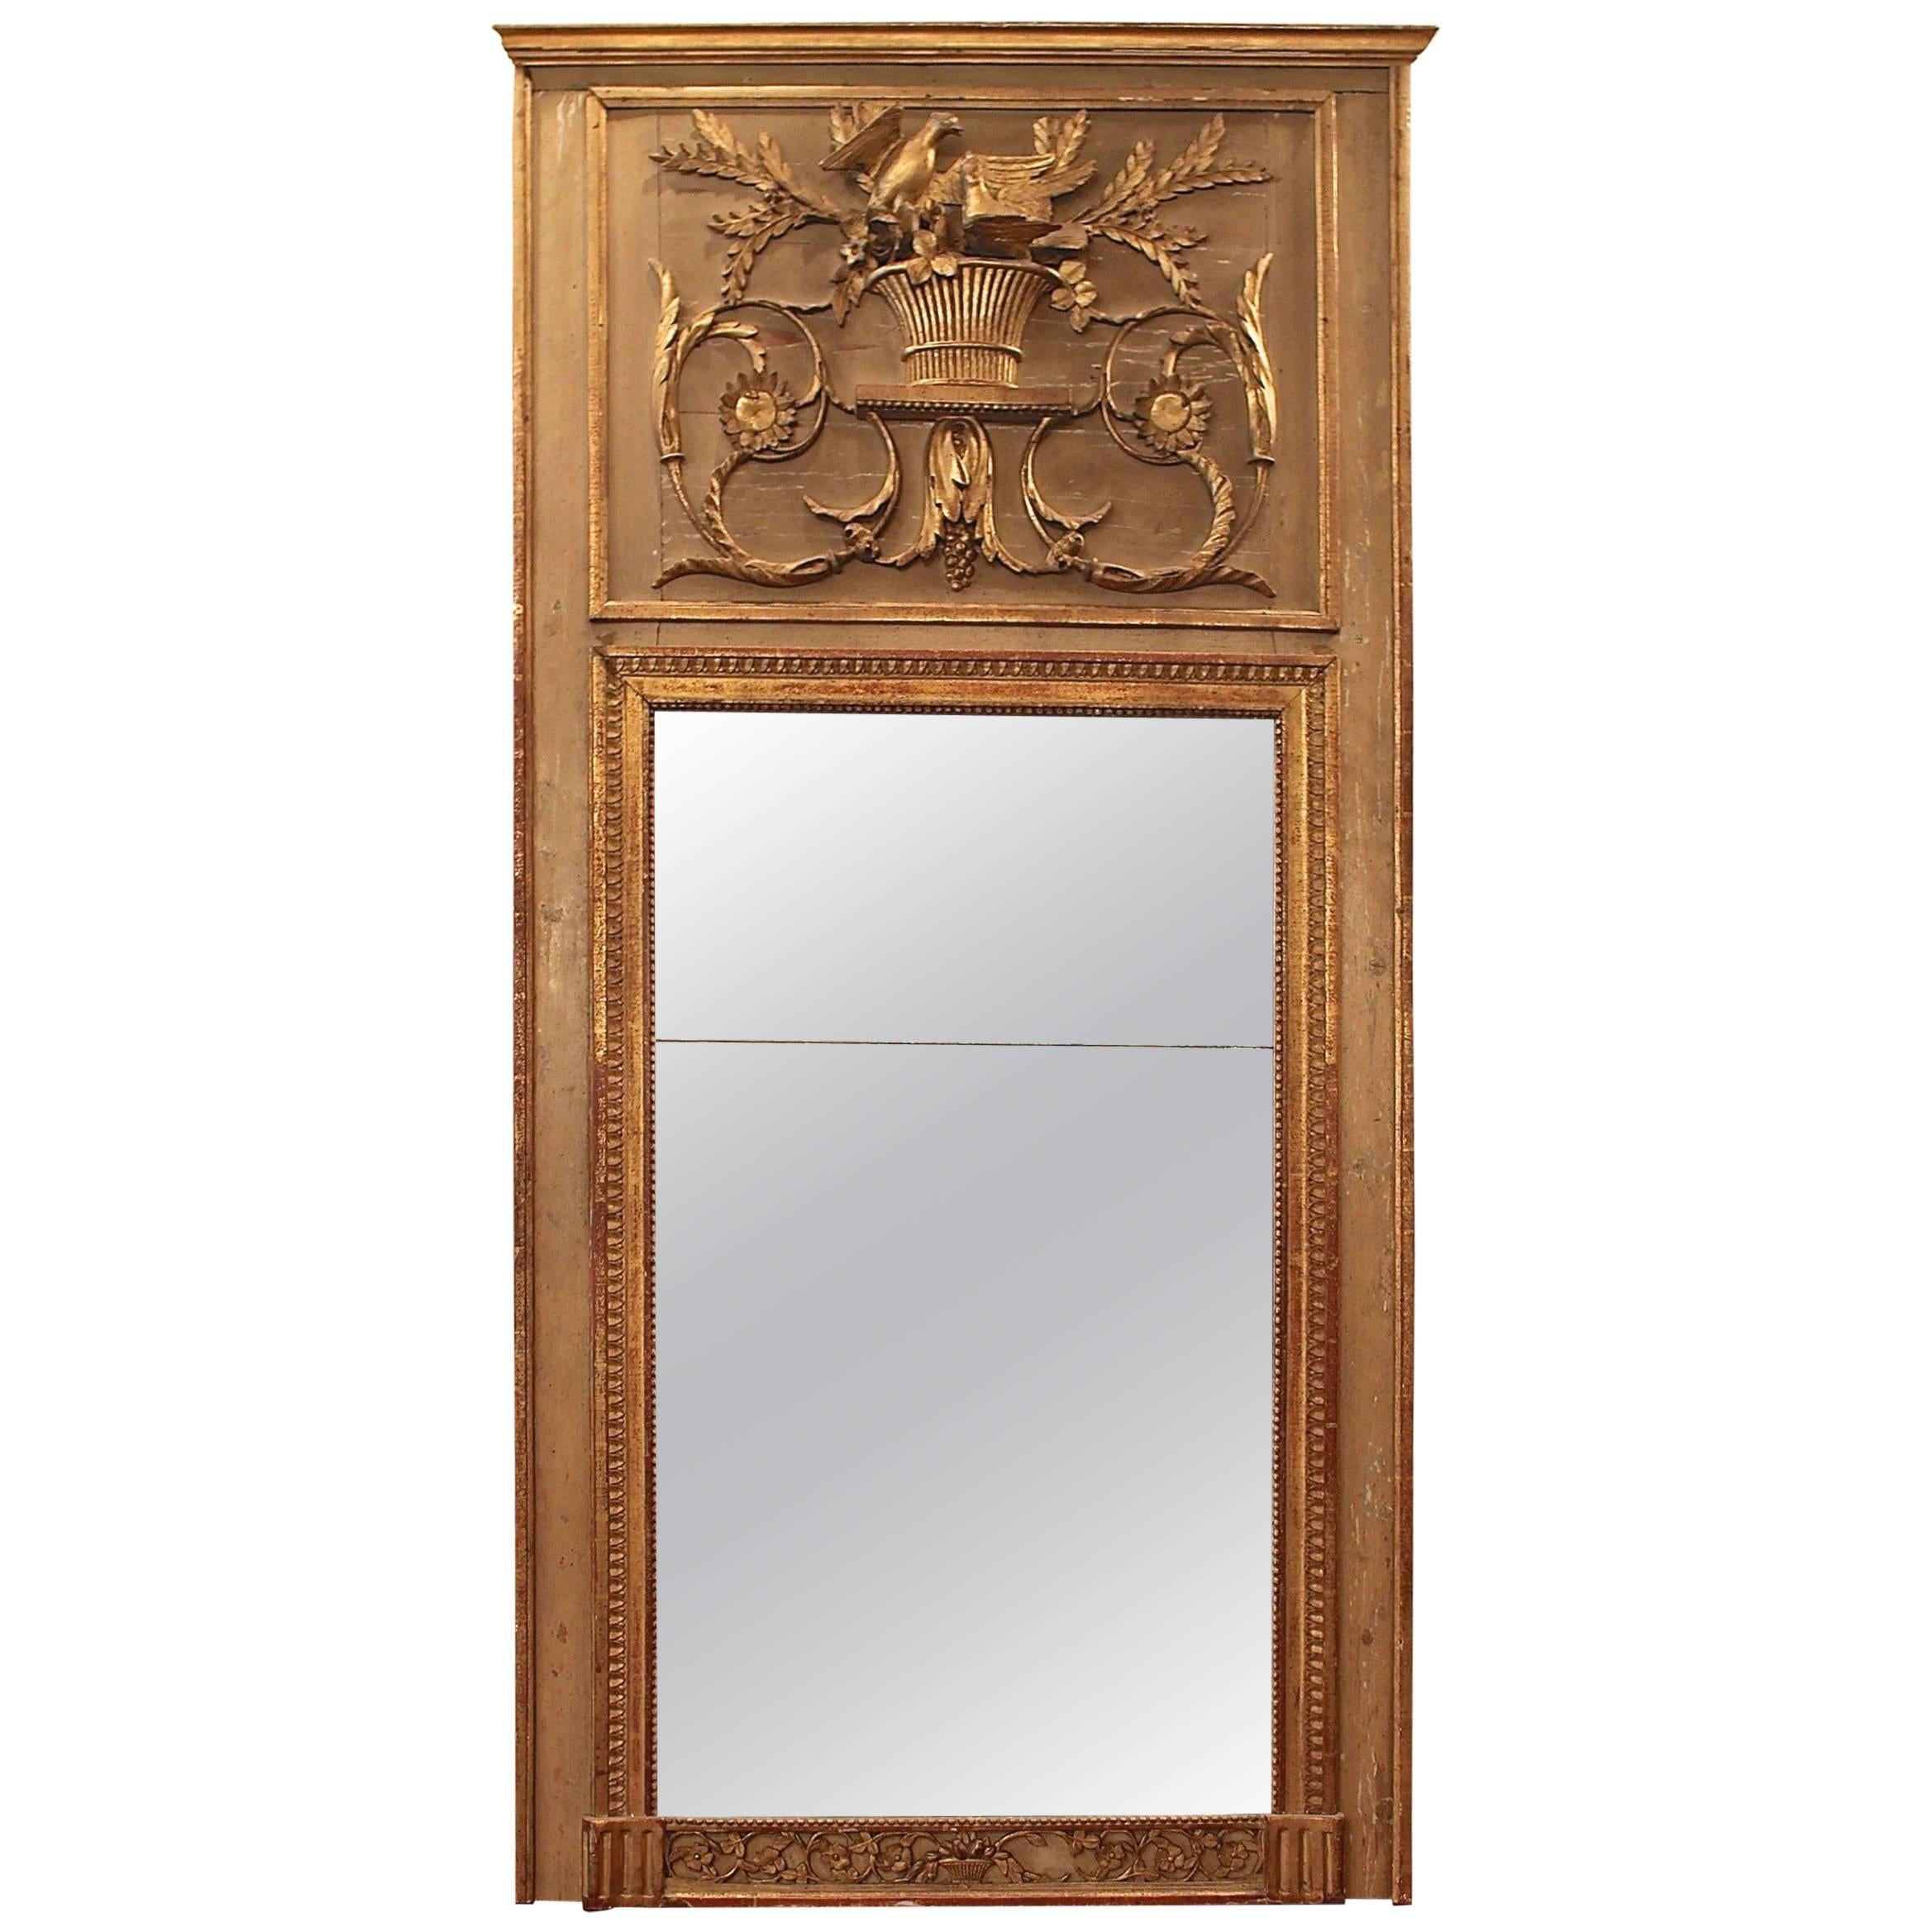 Late 18th Century Louis XVI Gilded Trumeau Mirror For Sale